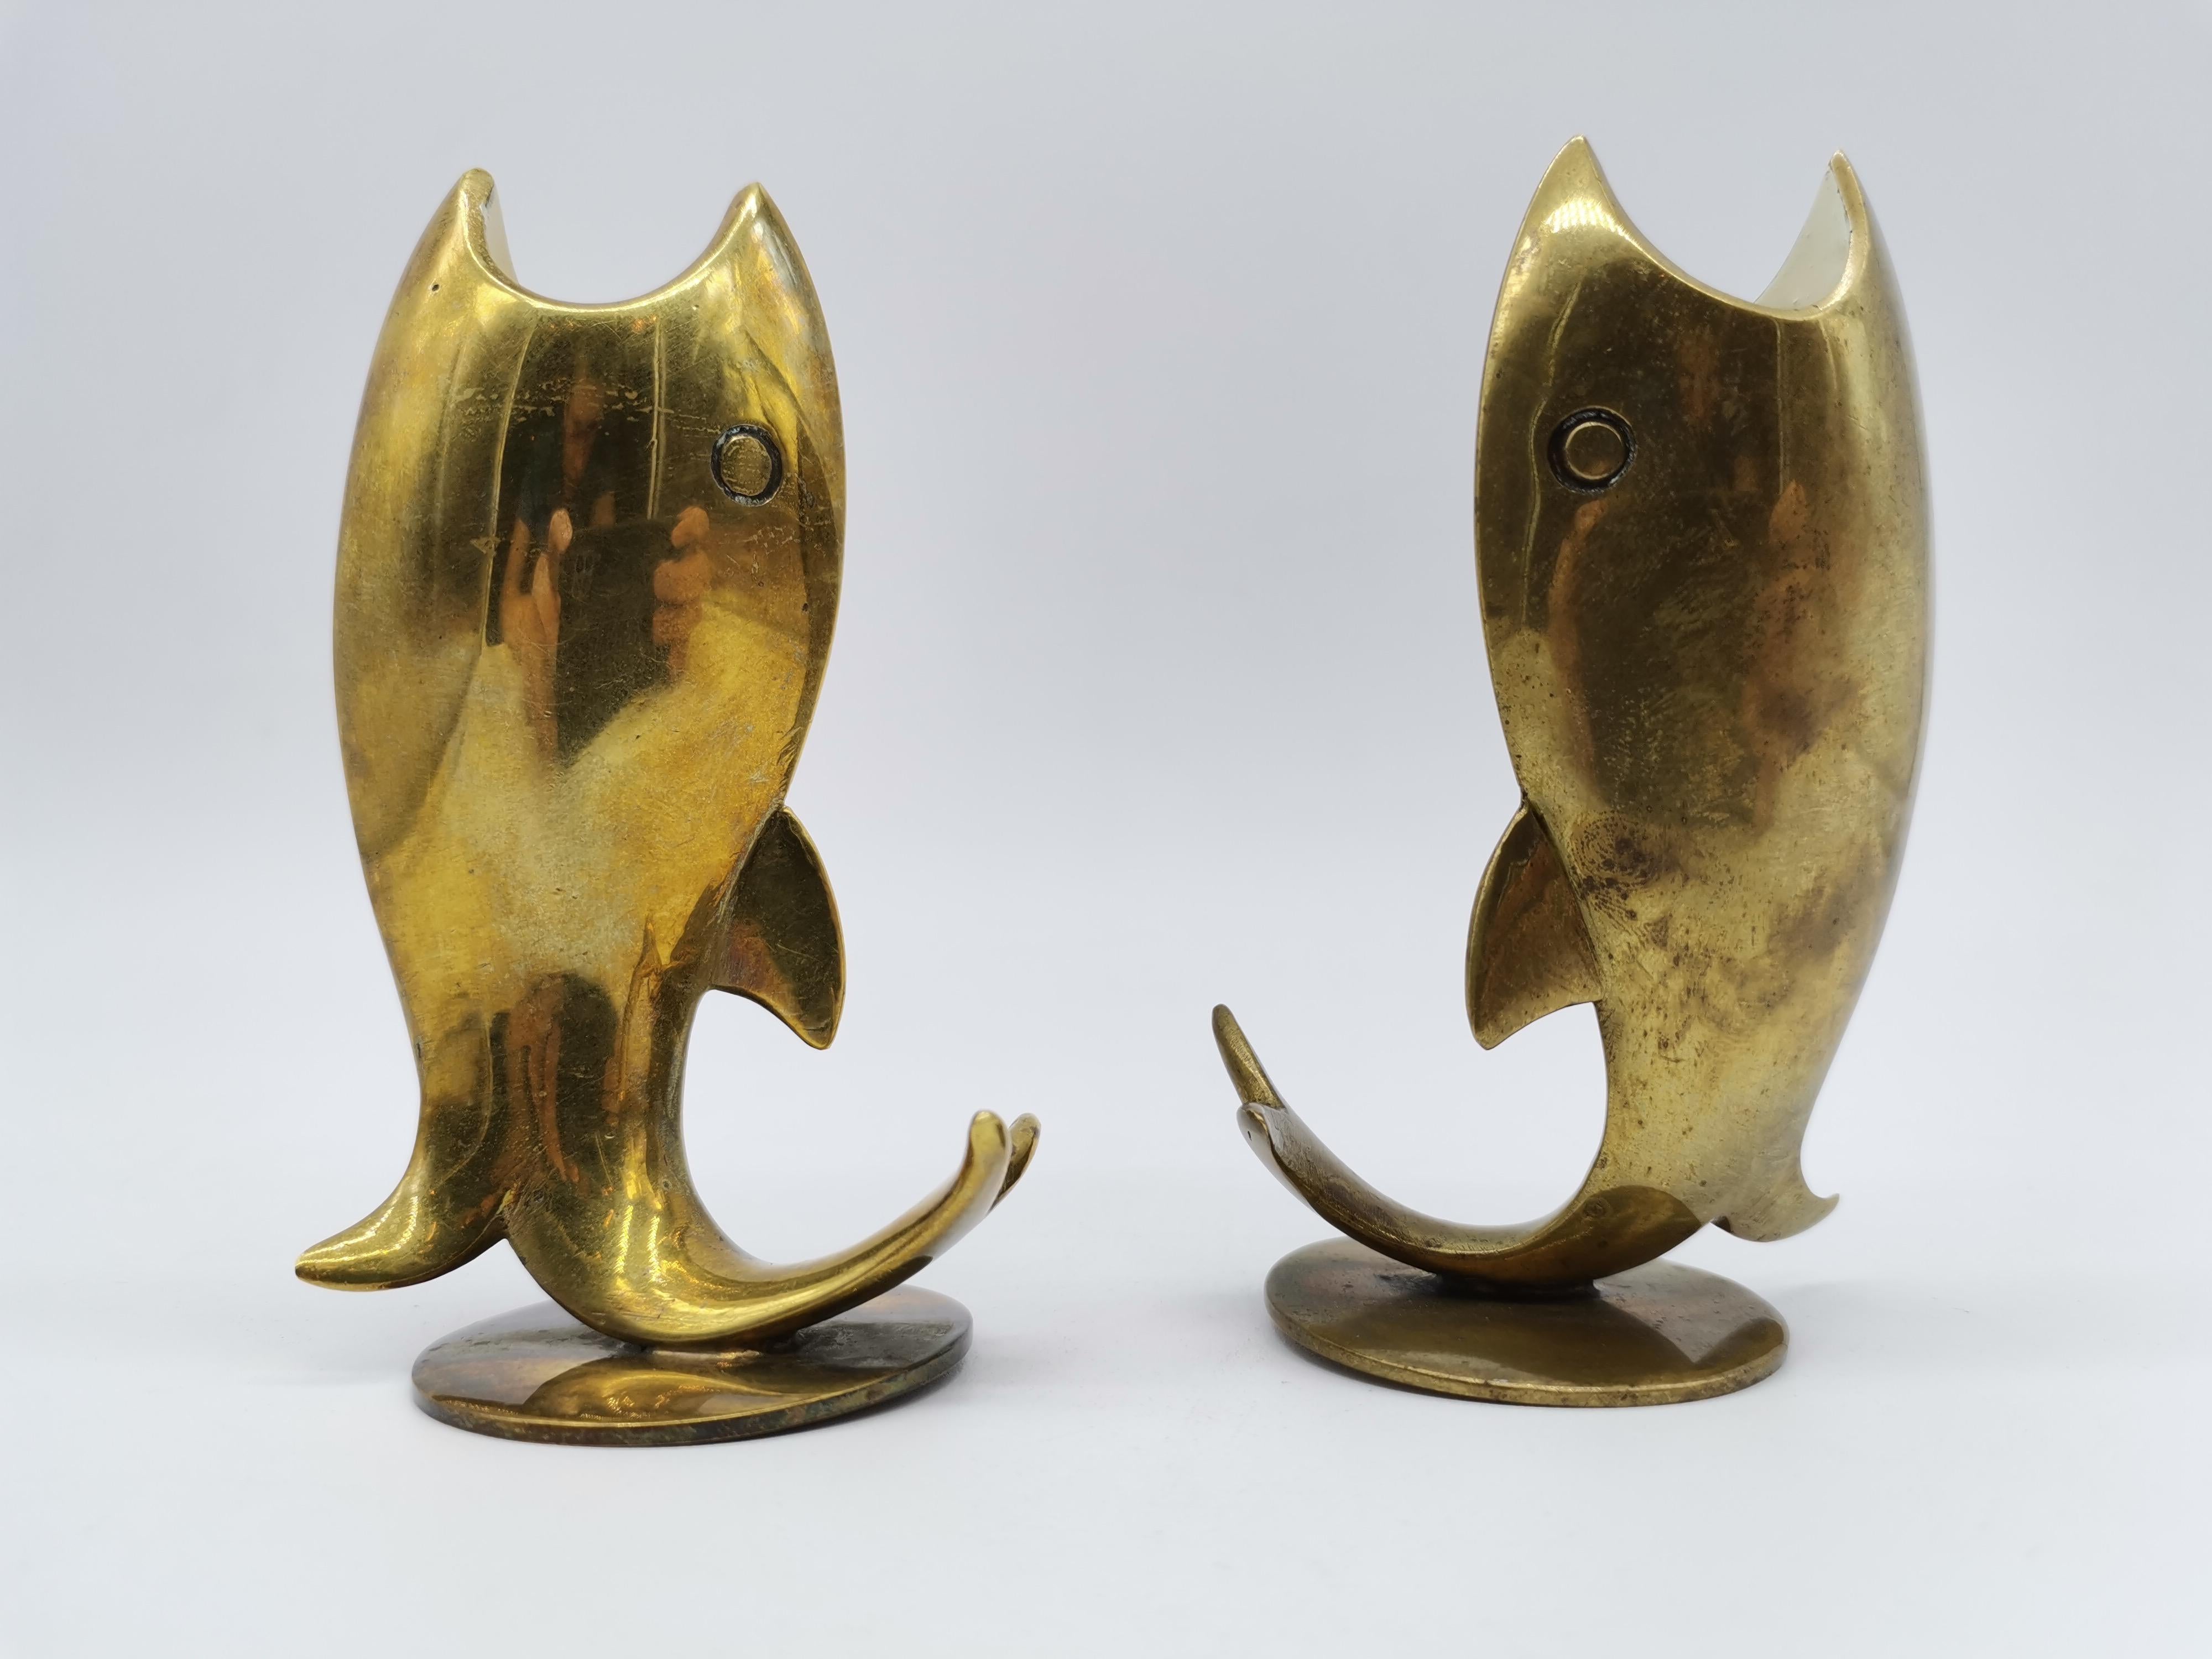 A pair of candle holders in fish look made out of brass and designed by Richard Rohac Vienna, Austria.